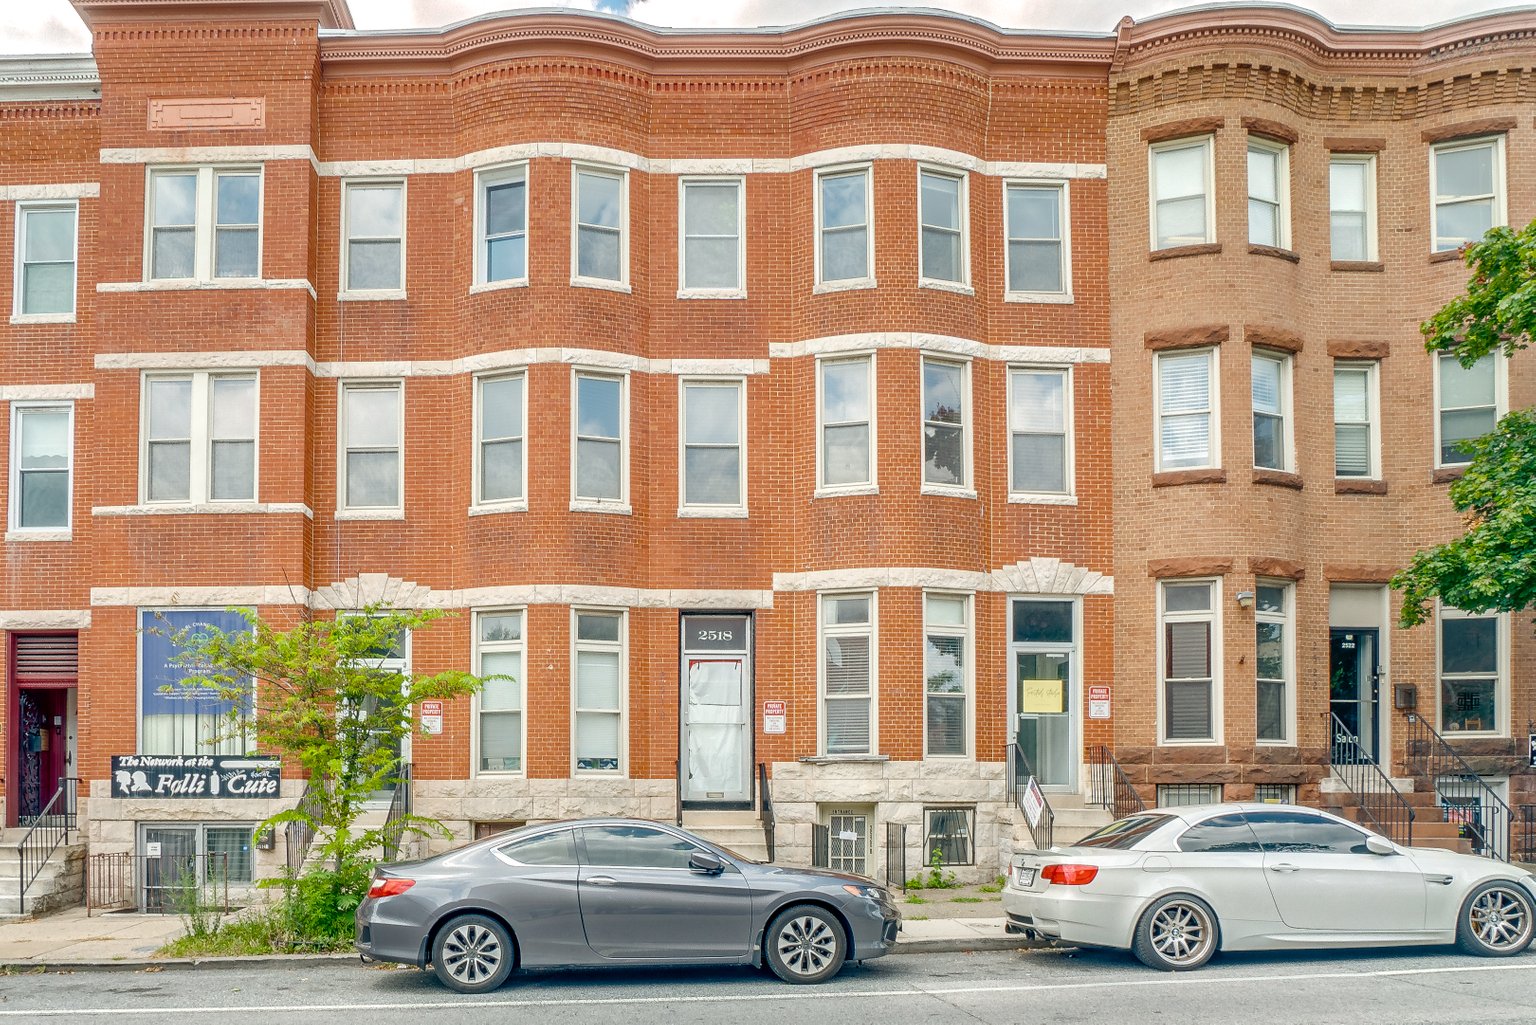 2516 – 2520 North Charles Street: Mixed Use Baltimore Investment Property